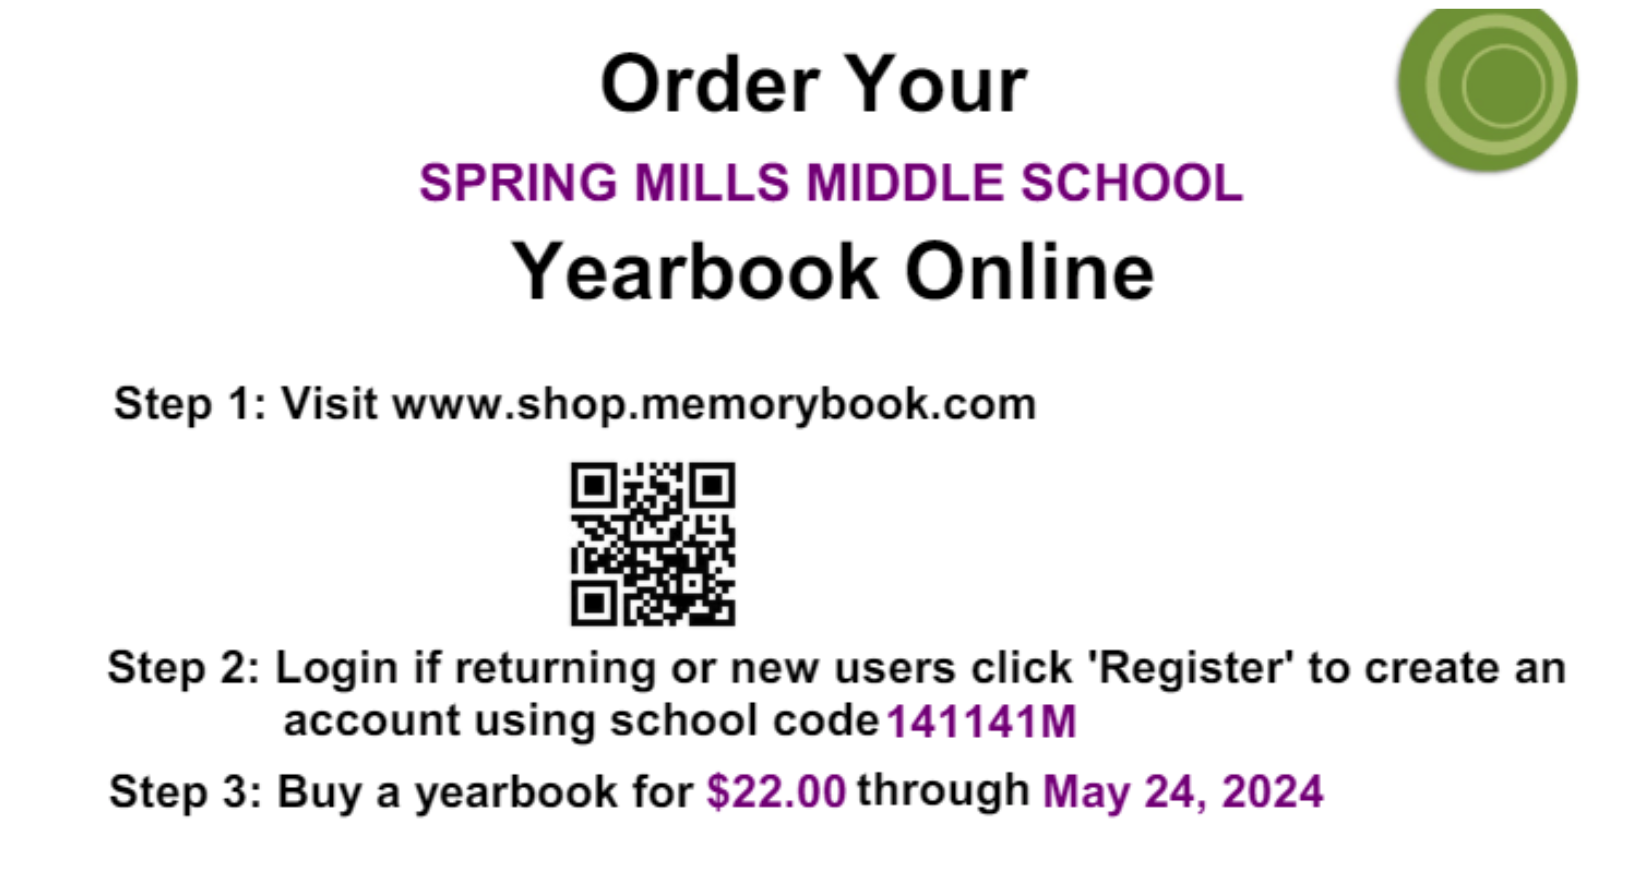 Directions on ordering a yearbook